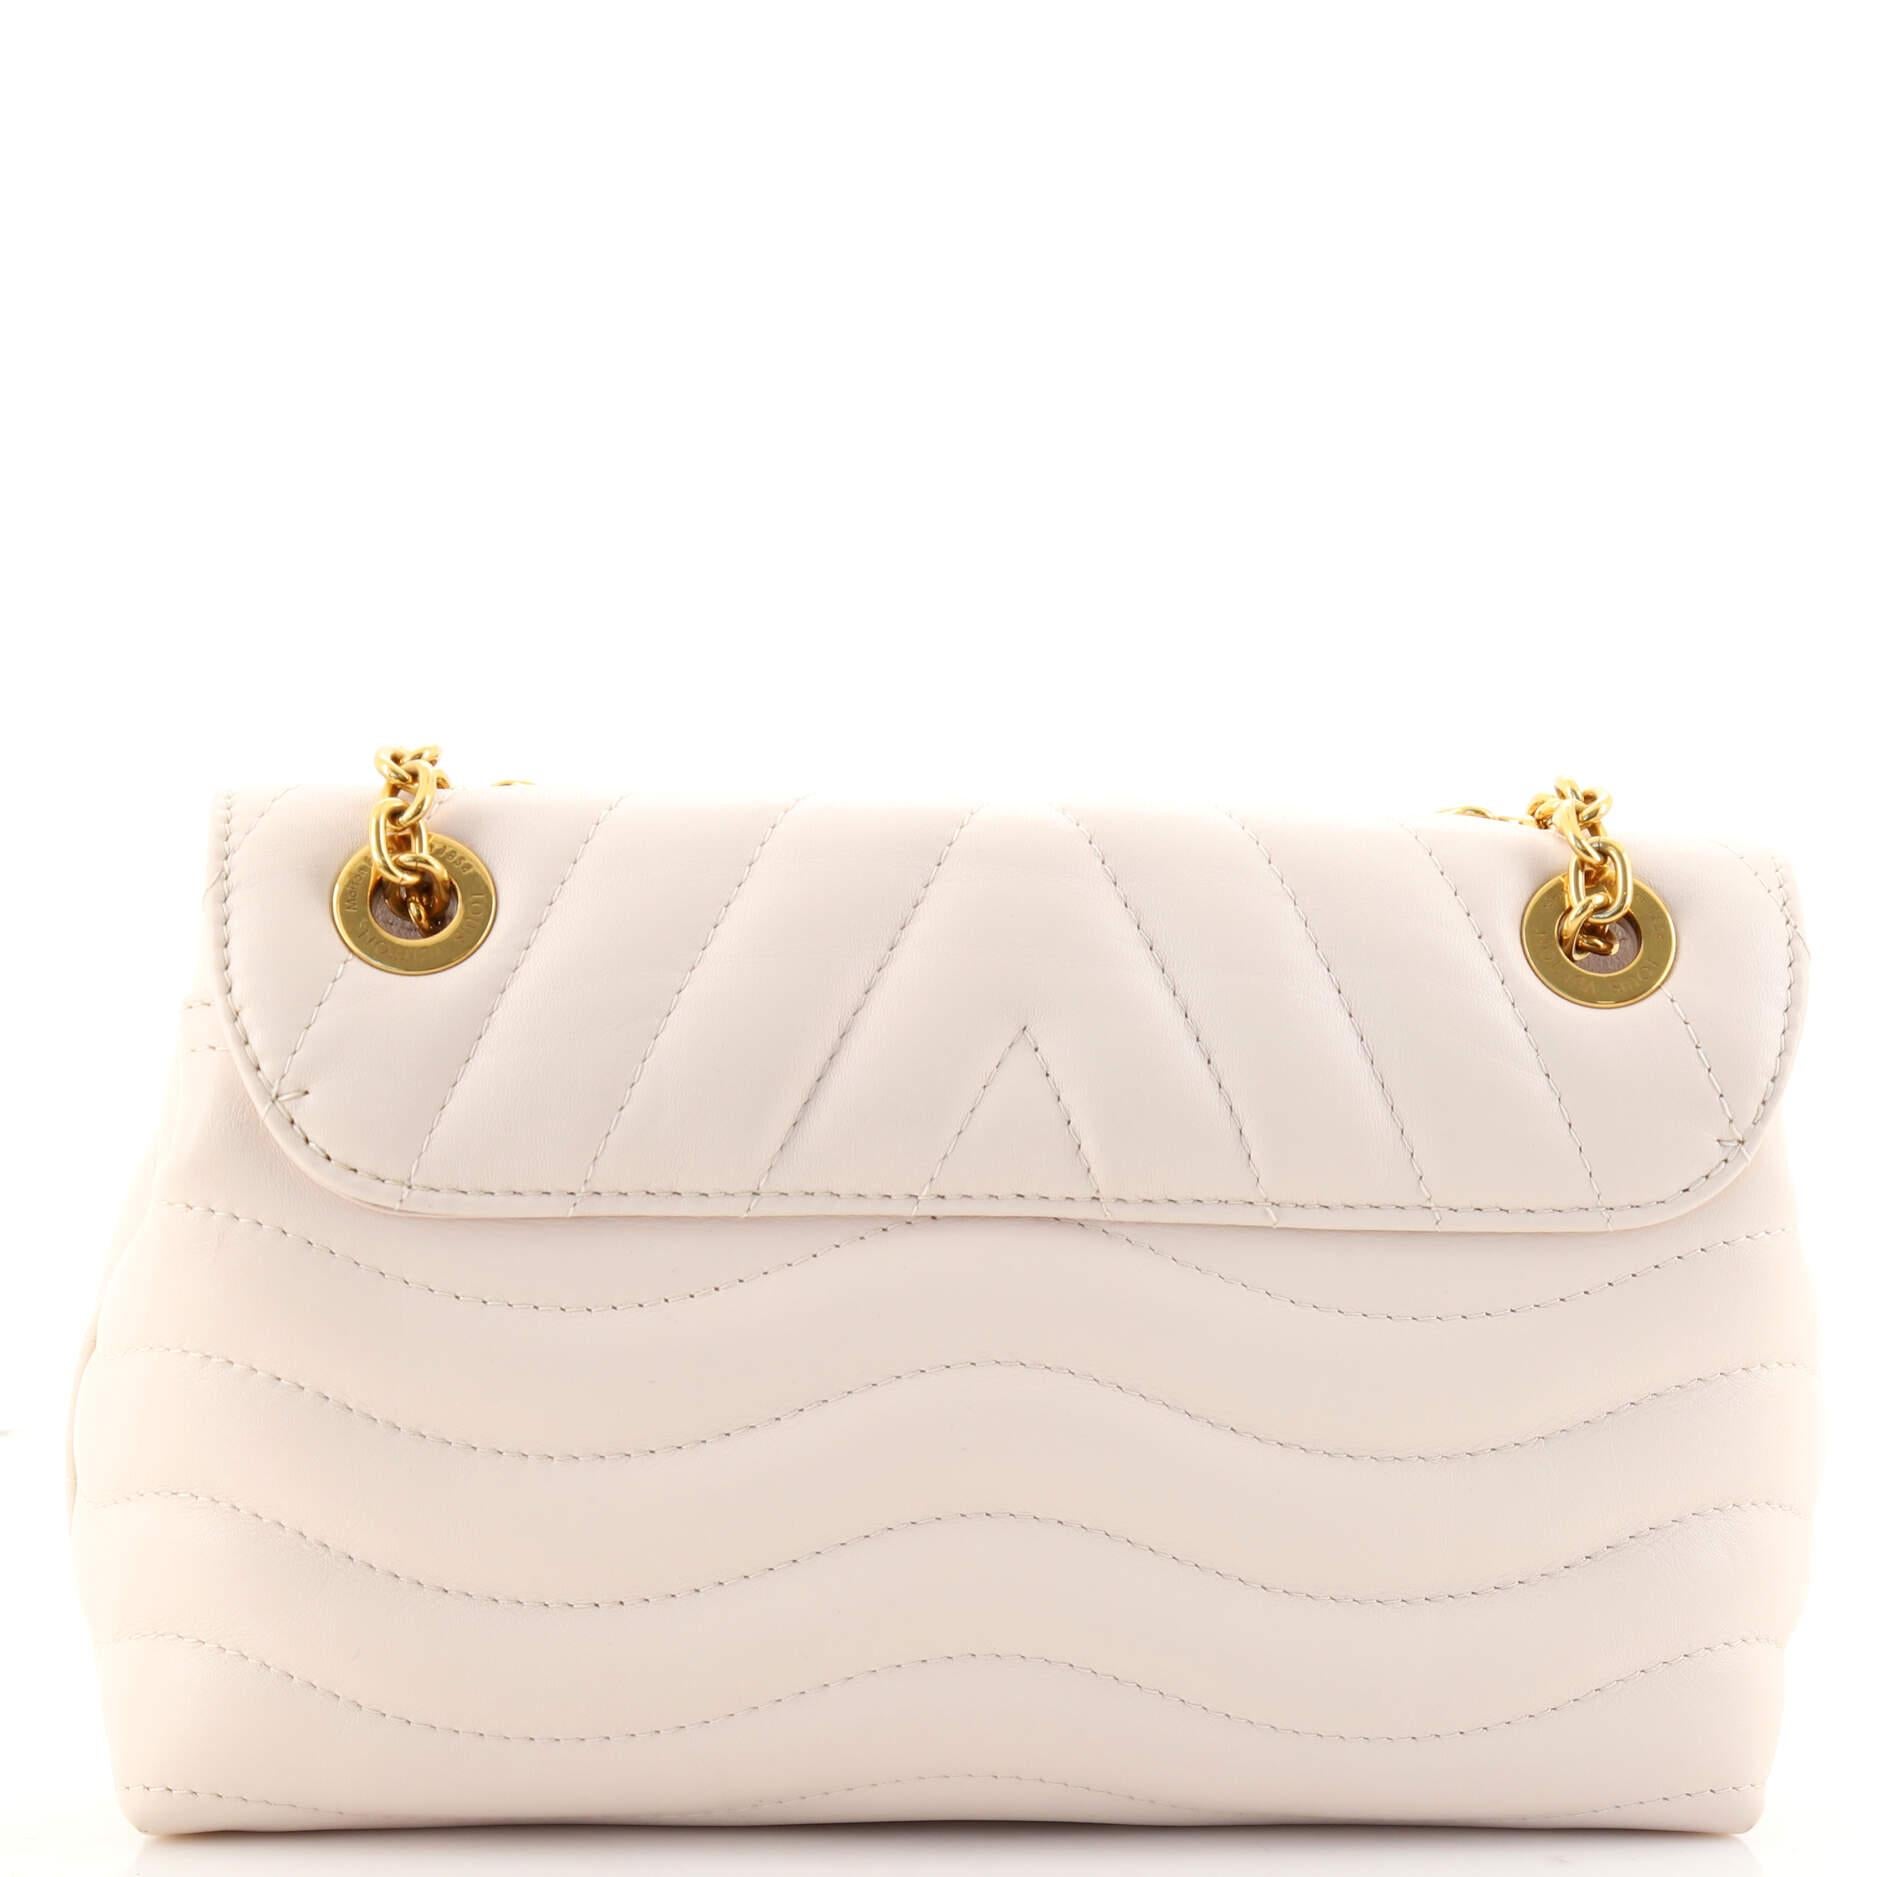 louis vuitton white quilted bag